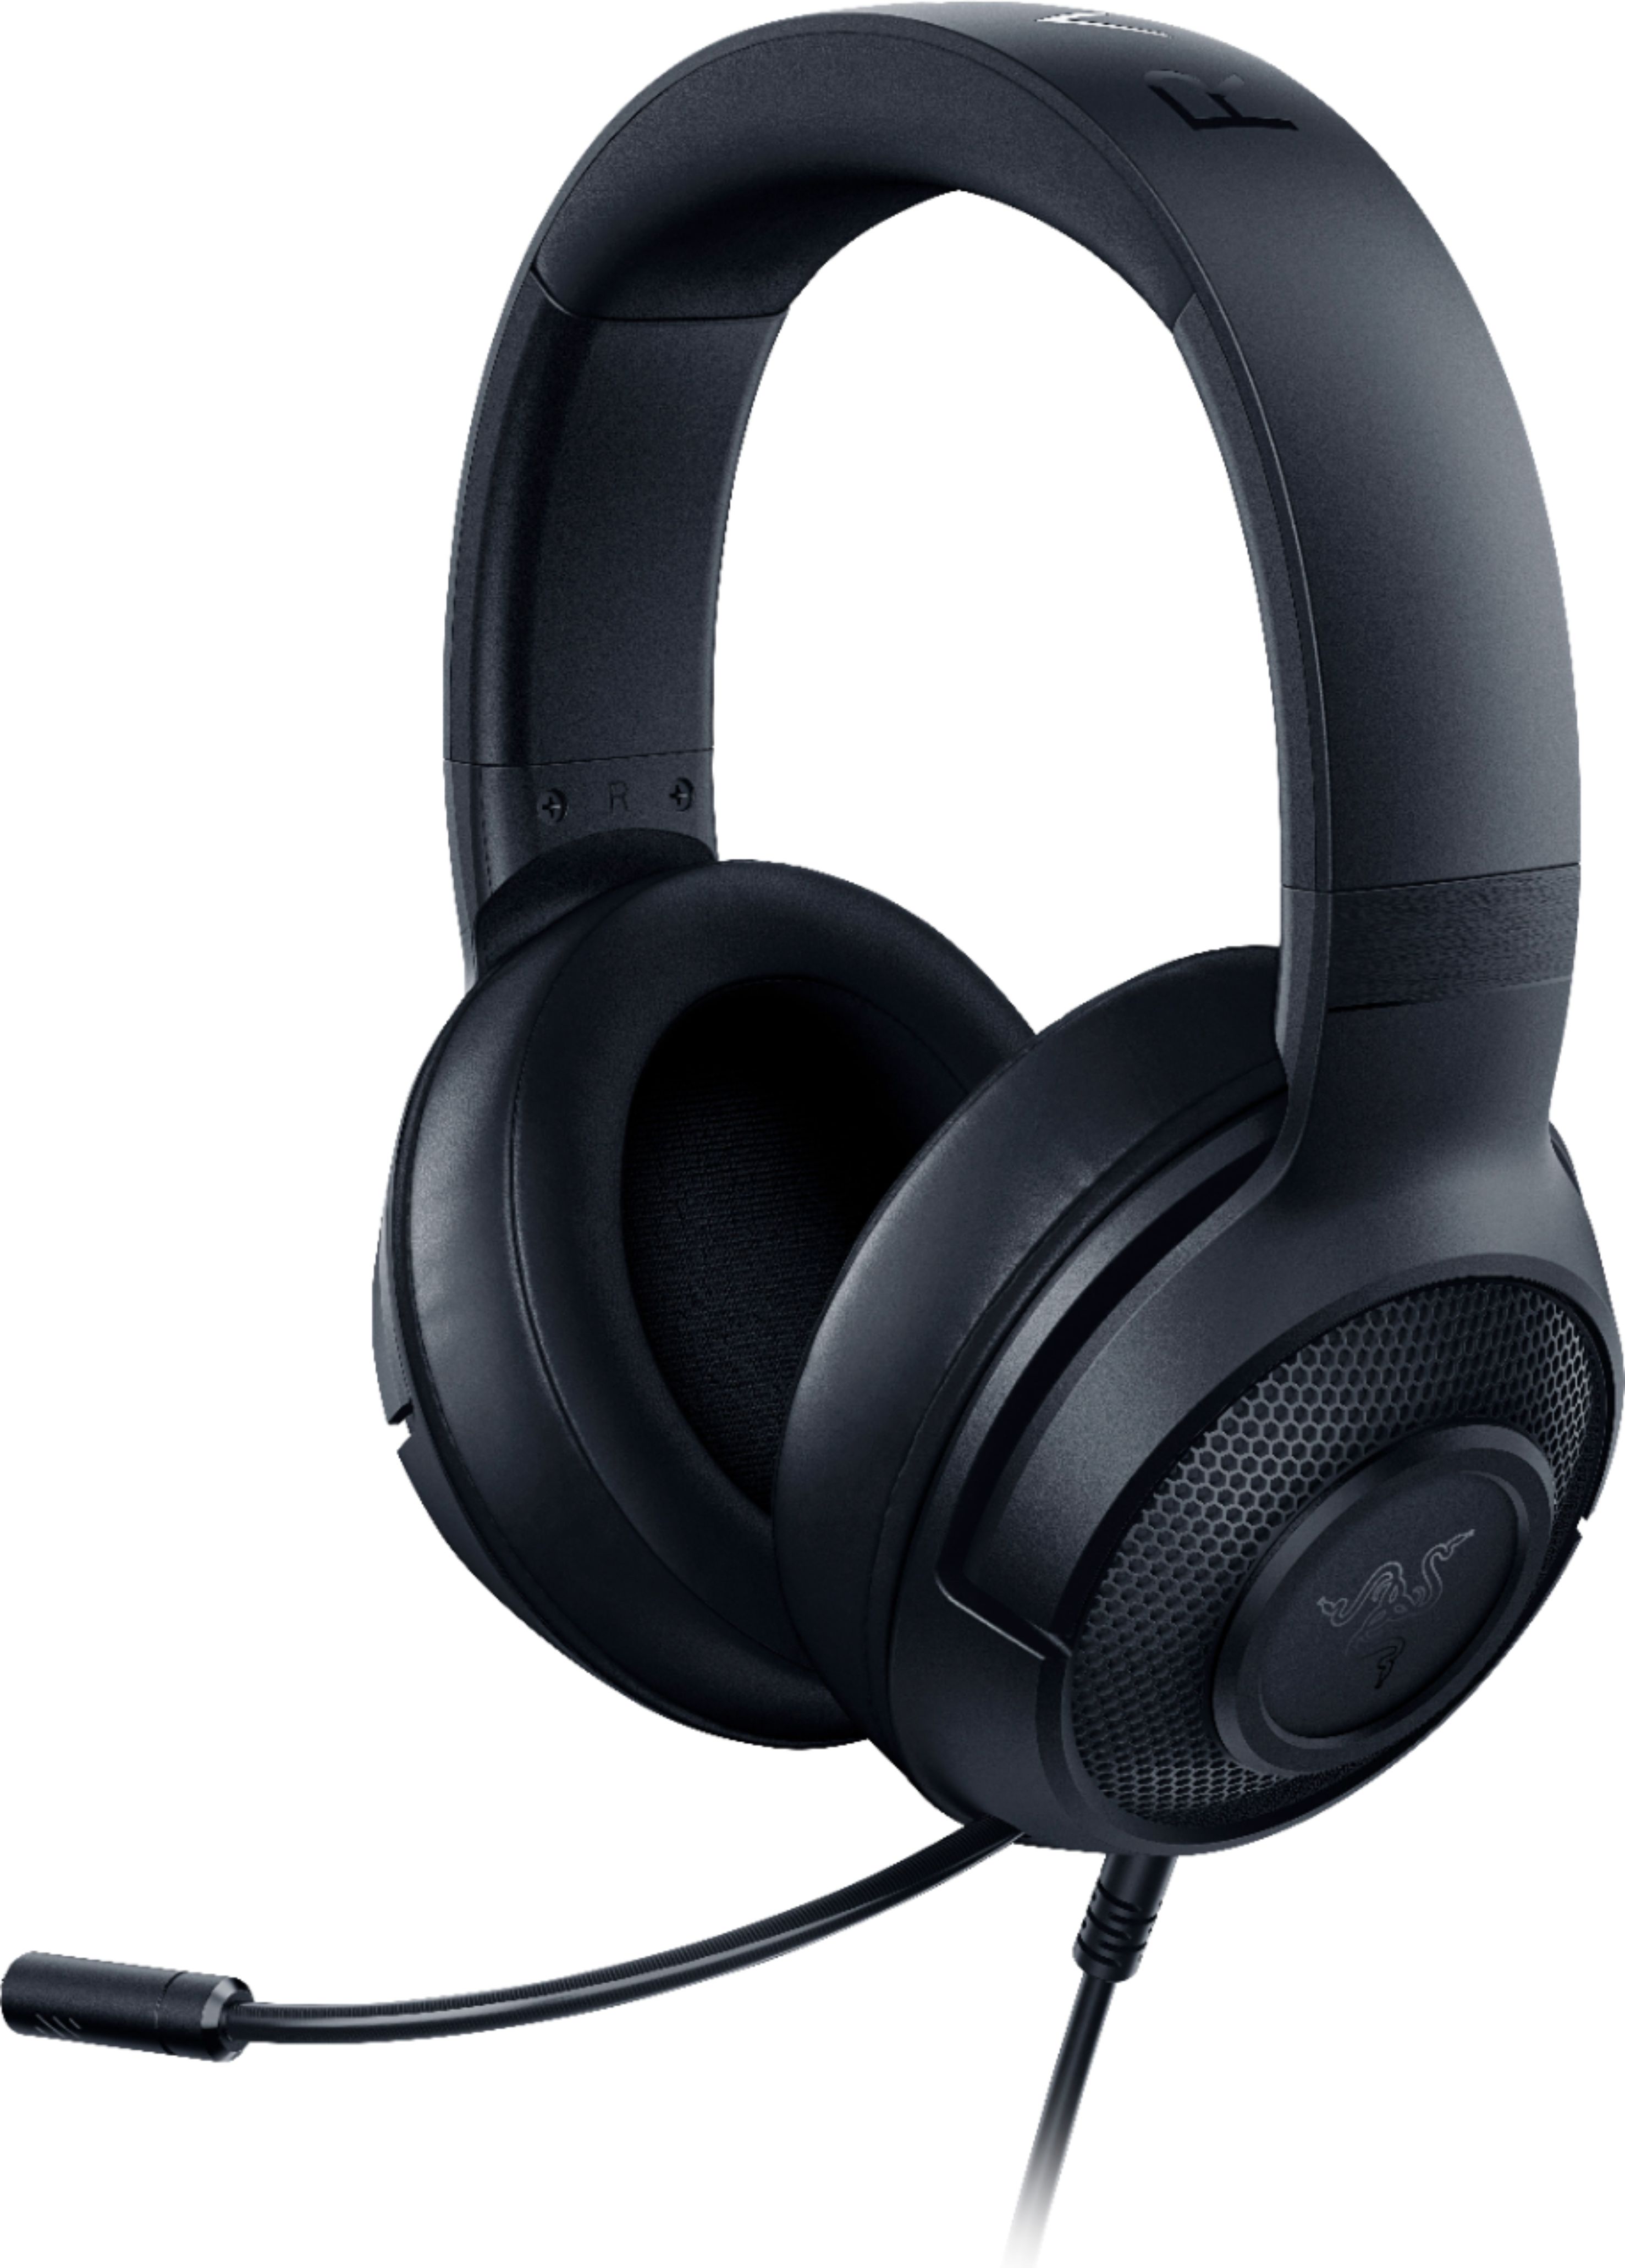 Angle View: Razer - Kraken X Wired 7.1 Surround Sound Gaming Headset for PC, PS4, PS5, Switch, Xbox X|S, and Xbox One - Black